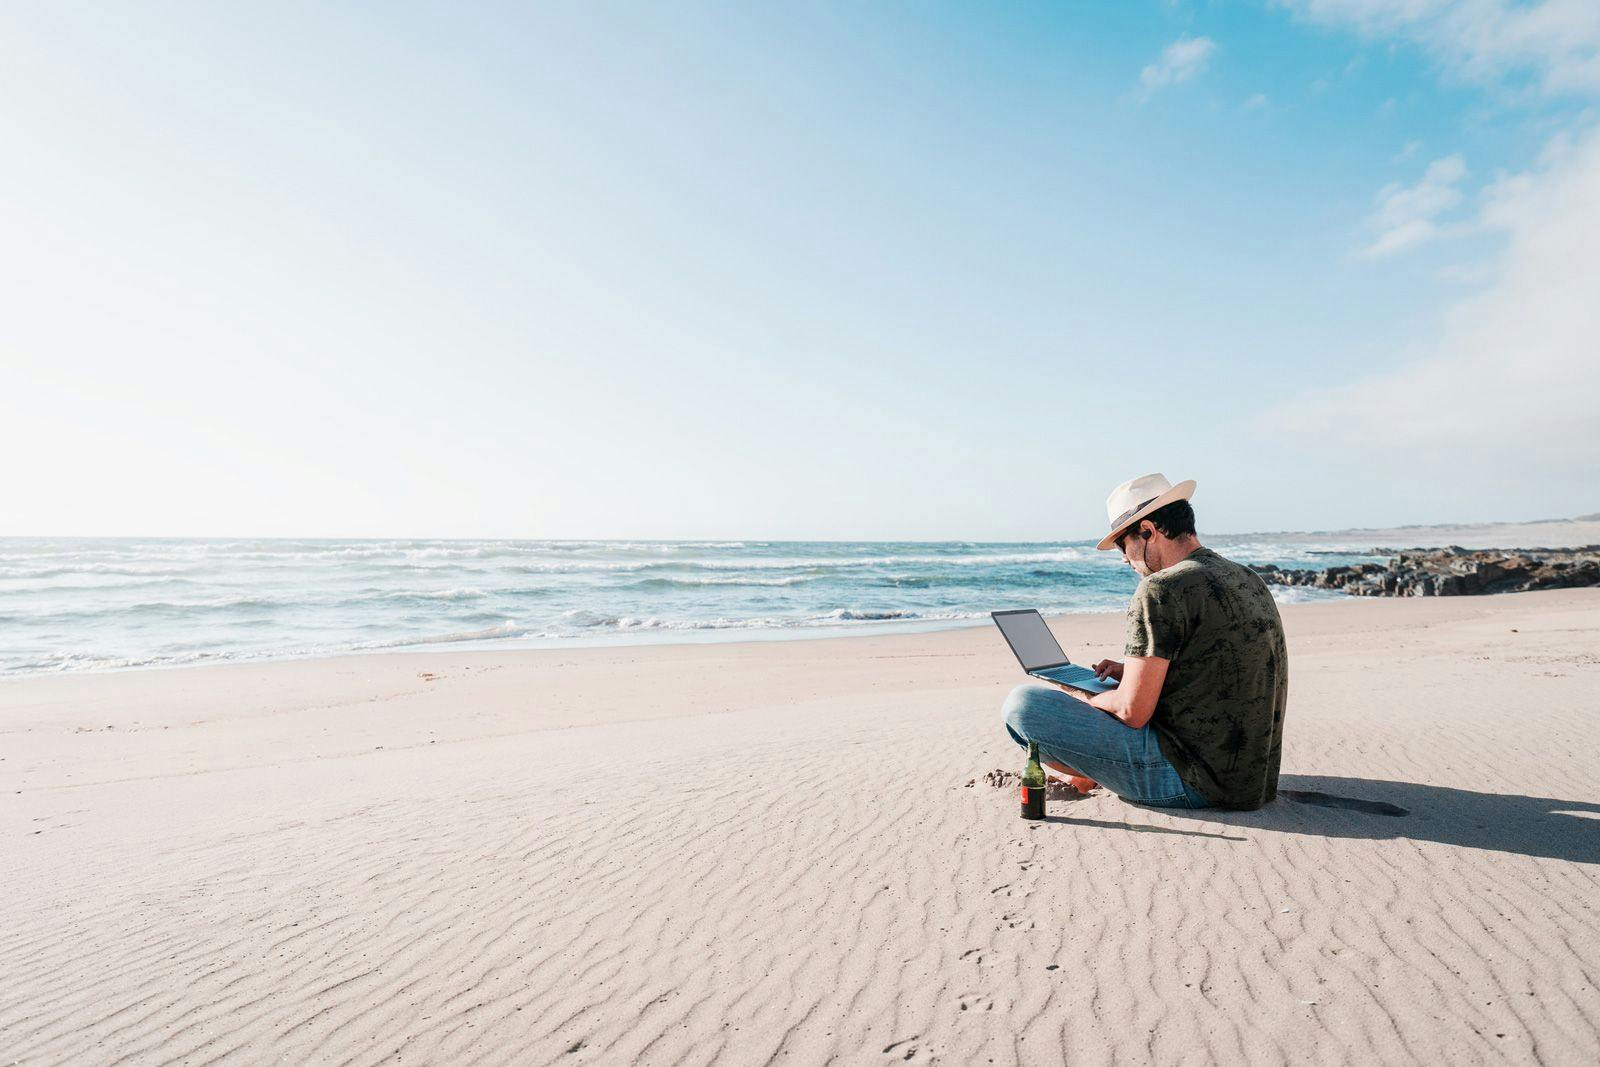 A man sitting on a beach working on a laptop